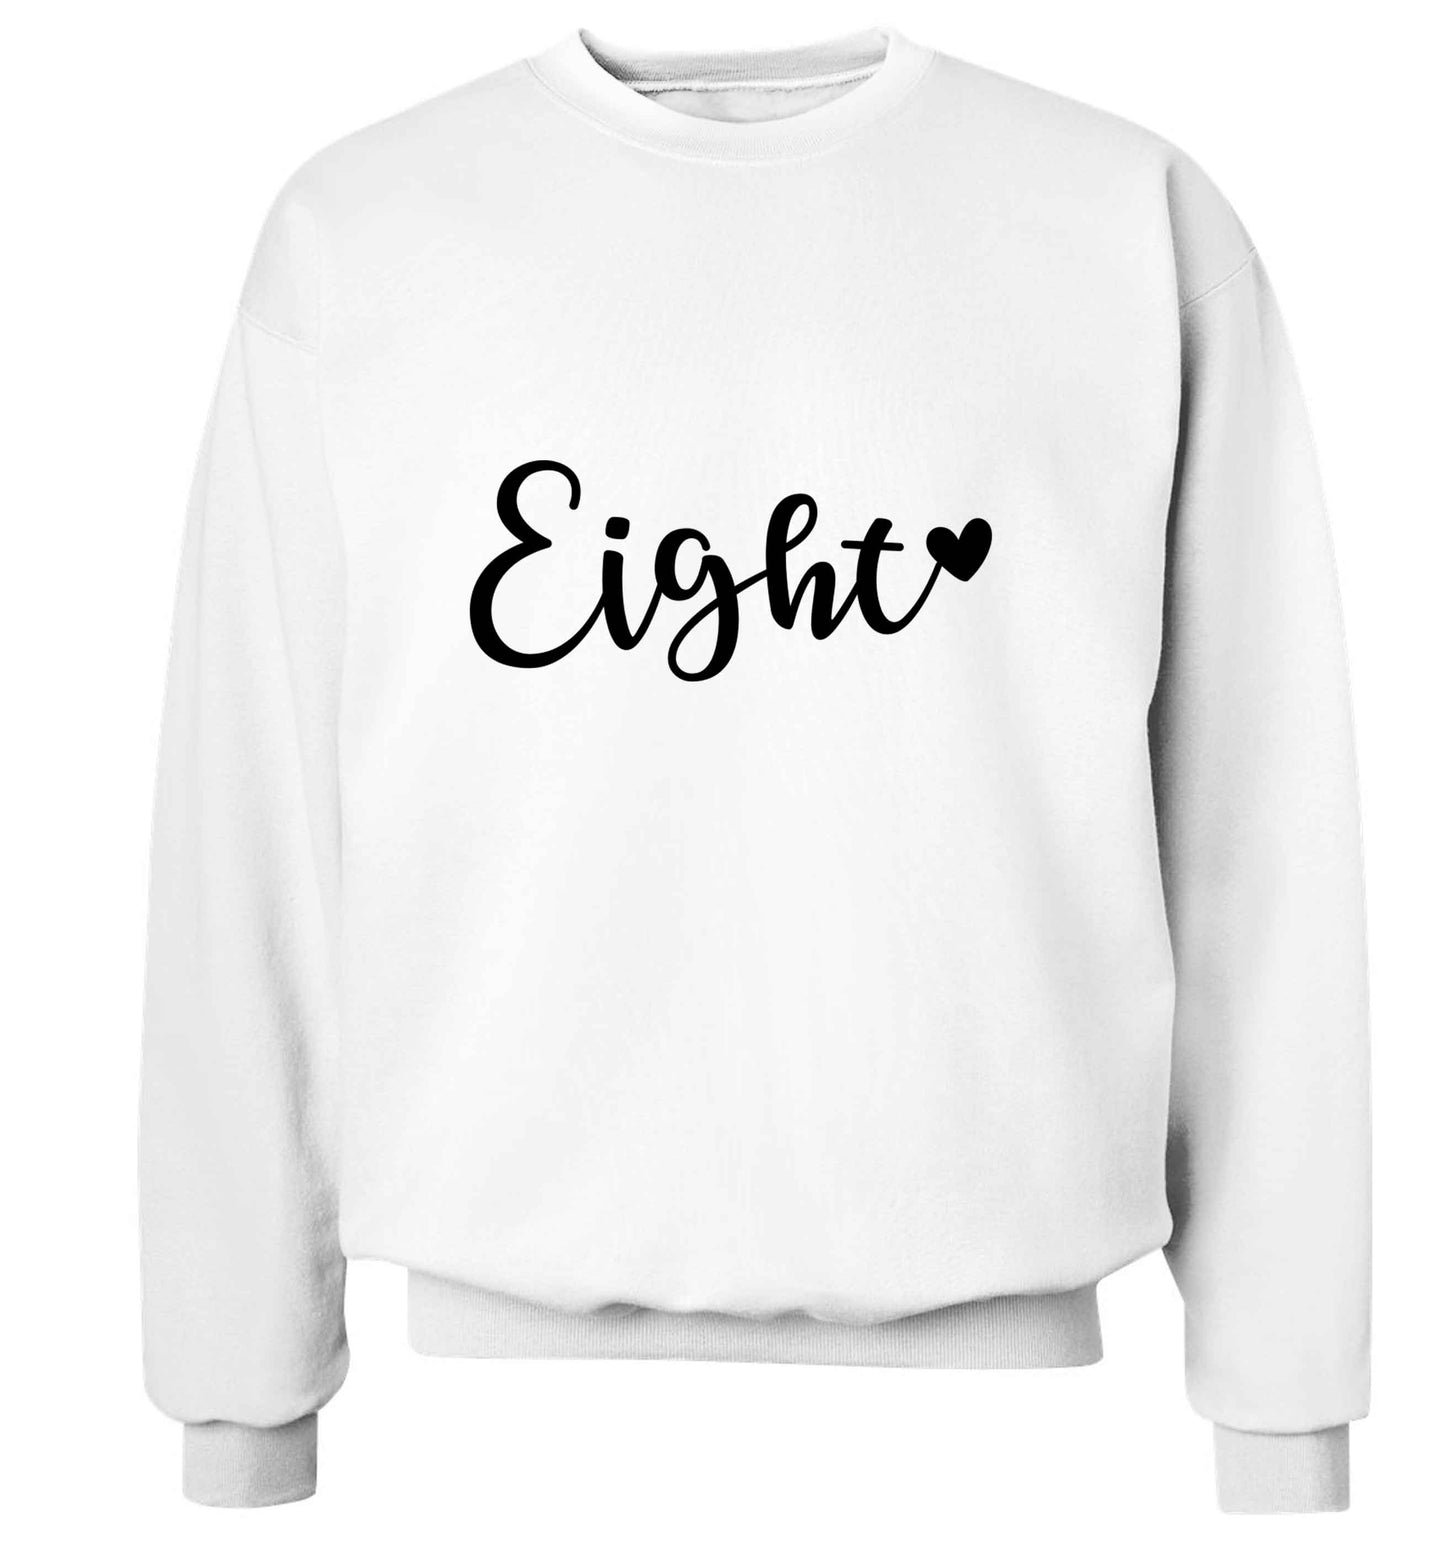 Eight and heart adult's unisex white sweater 2XL